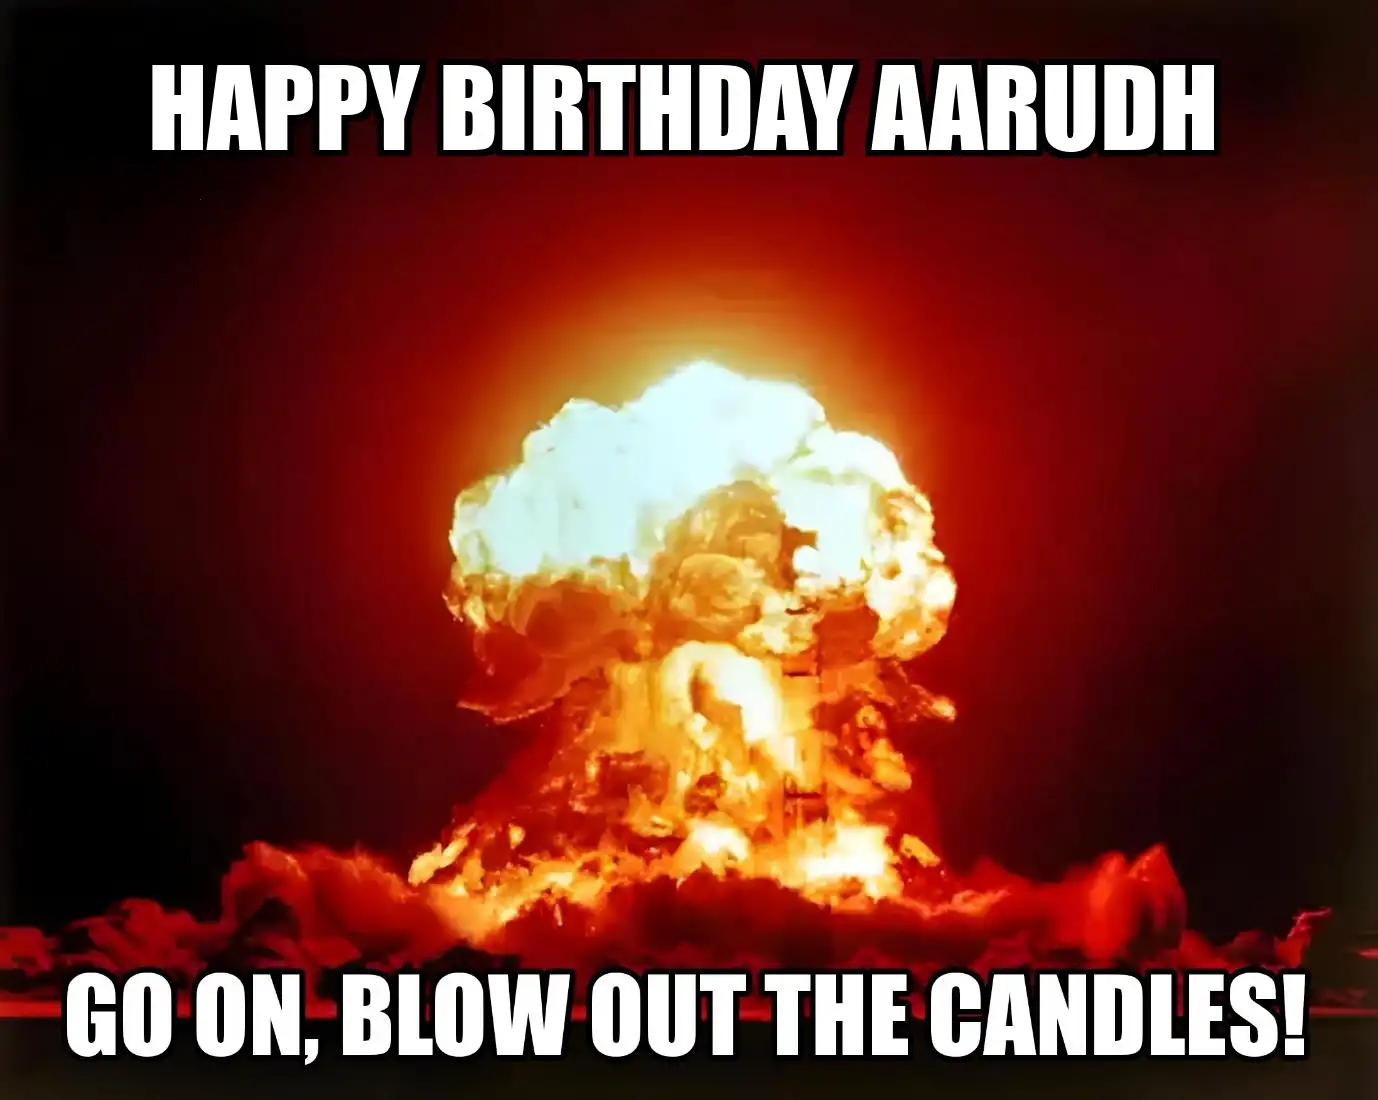 Happy Birthday Aarudh Go On Blow Out The Candles Meme